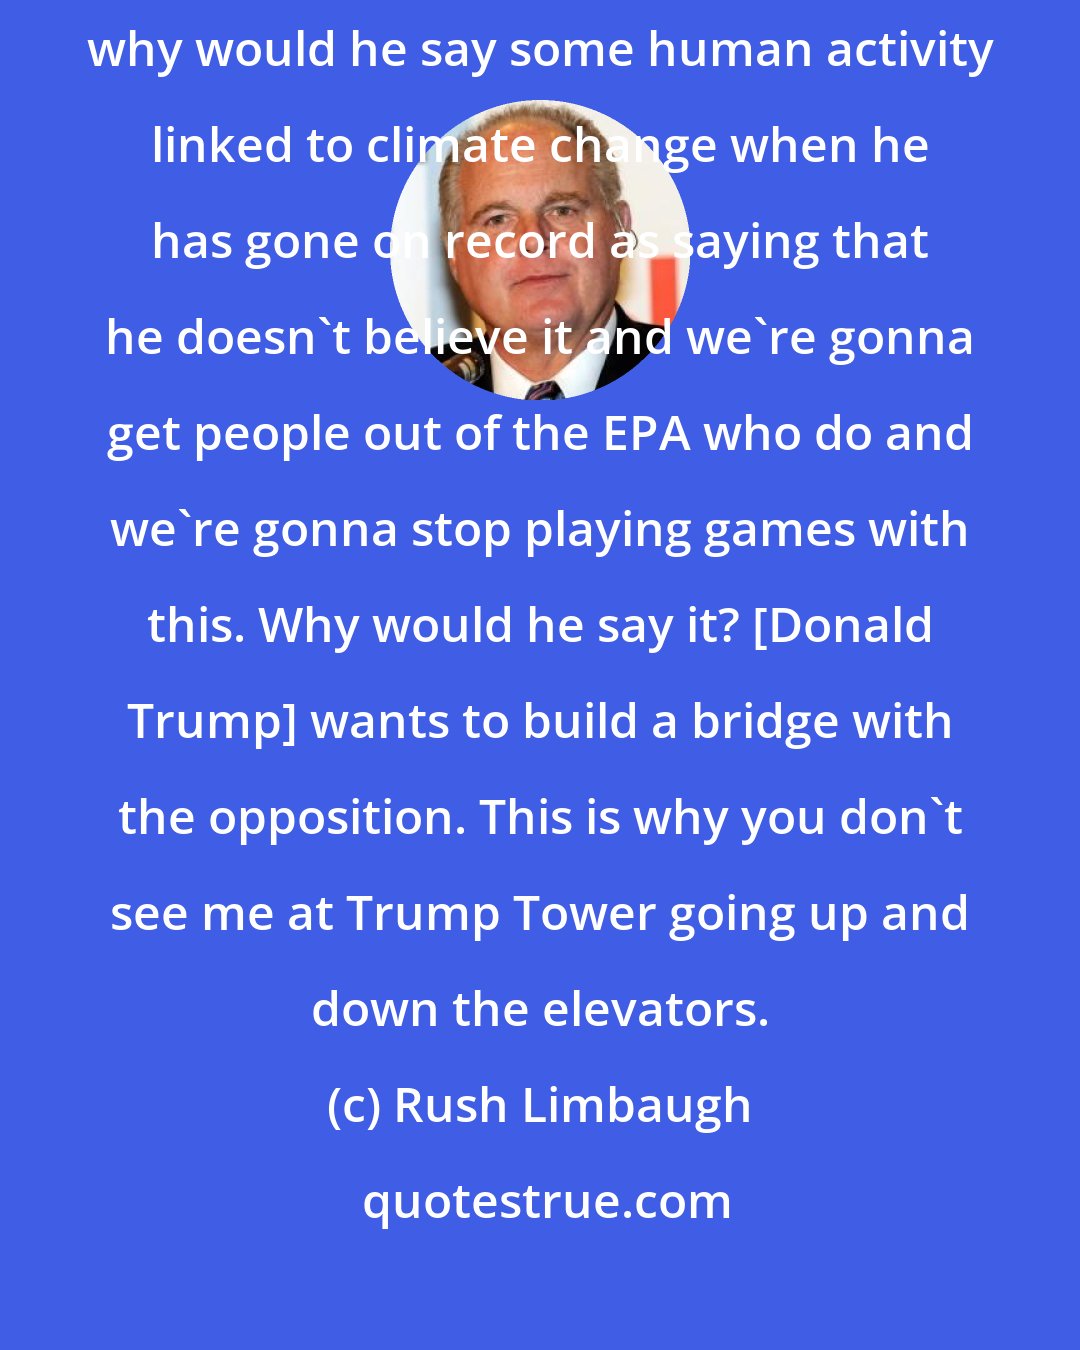 Rush Limbaugh: Just wait and see this stuff play out as it does. But if, for example, why would he say some human activity linked to climate change when he has gone on record as saying that he doesn't believe it and we're gonna get people out of the EPA who do and we're gonna stop playing games with this. Why would he say it? [Donald Trump] wants to build a bridge with the opposition. This is why you don't see me at Trump Tower going up and down the elevators.